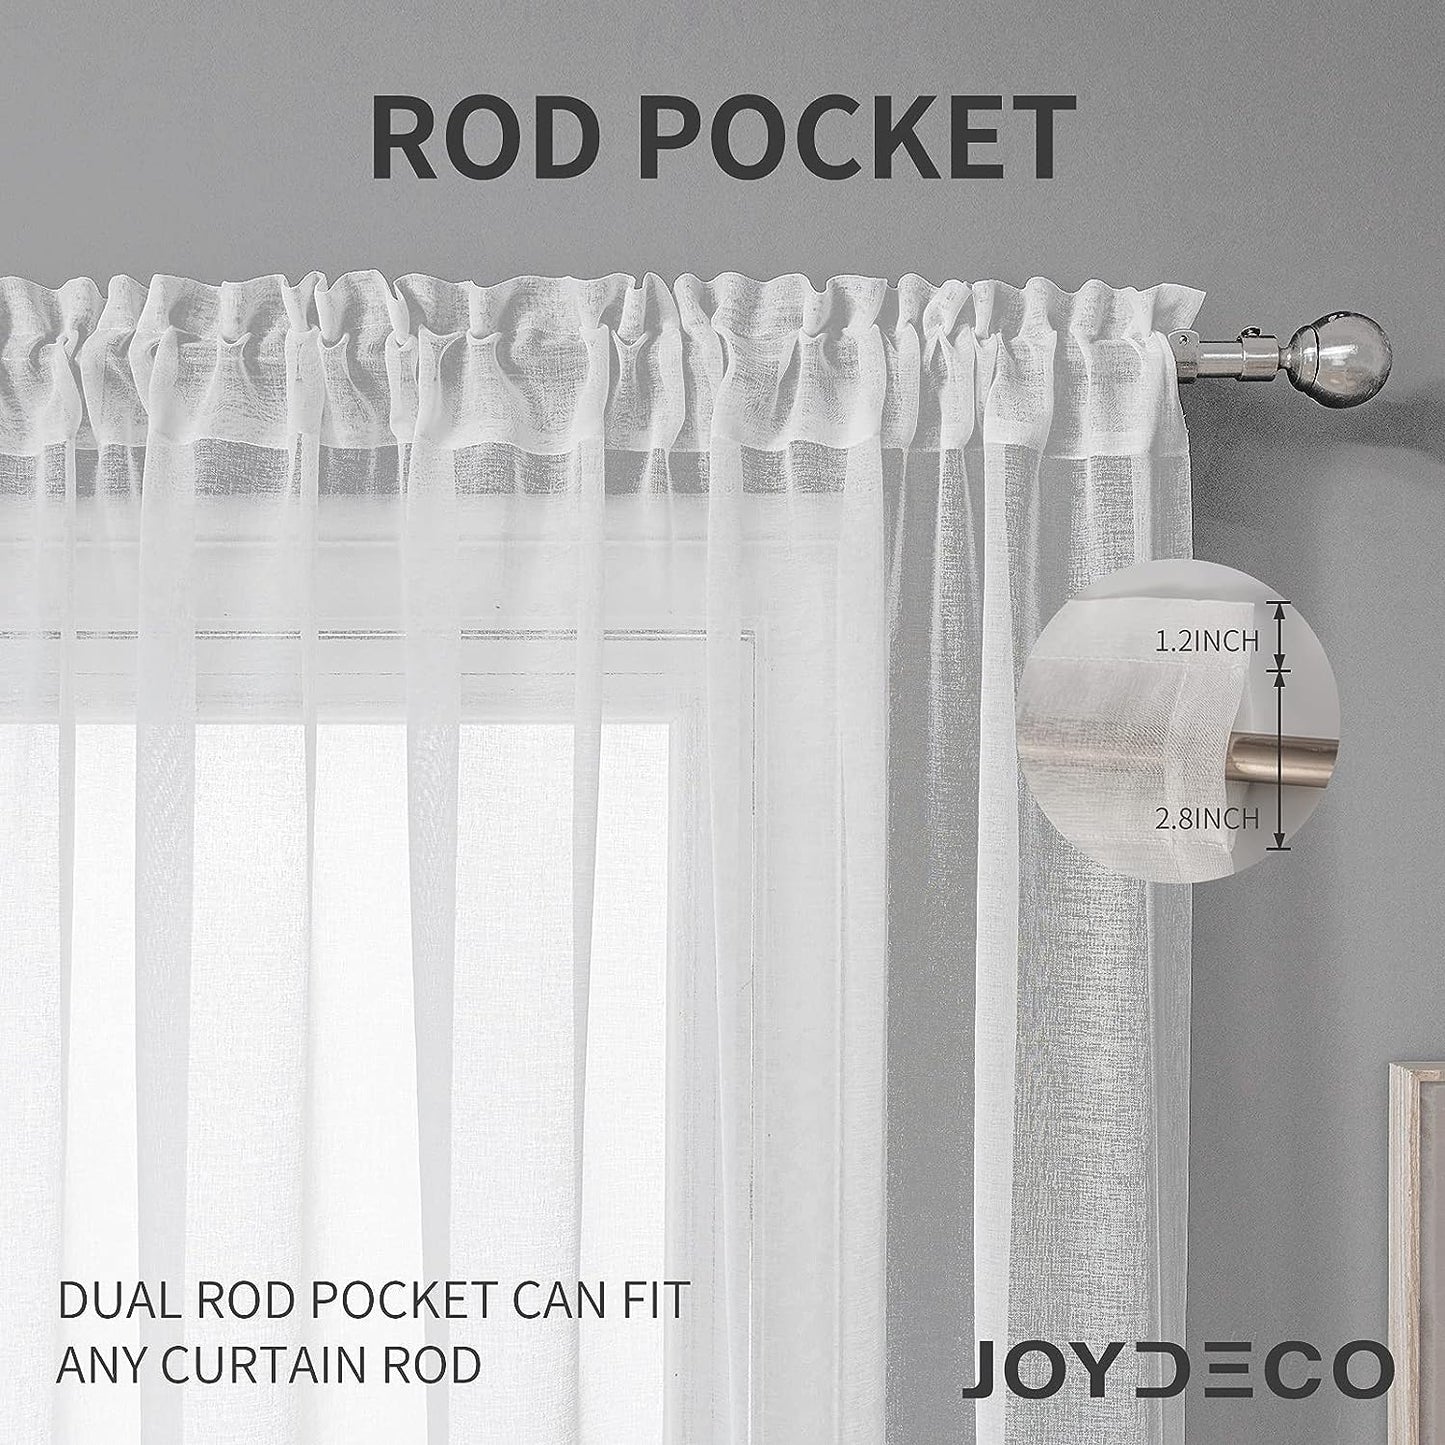 Joydeco White Sheer Curtains 63 Inch Length 2 Panels Set, Rod Pocket Long Sheer Curtains for Window Bedroom Living Room, Lightweight Semi Drape Panels for Yard Patio (54X63 Inch, off White)  Joydeco   